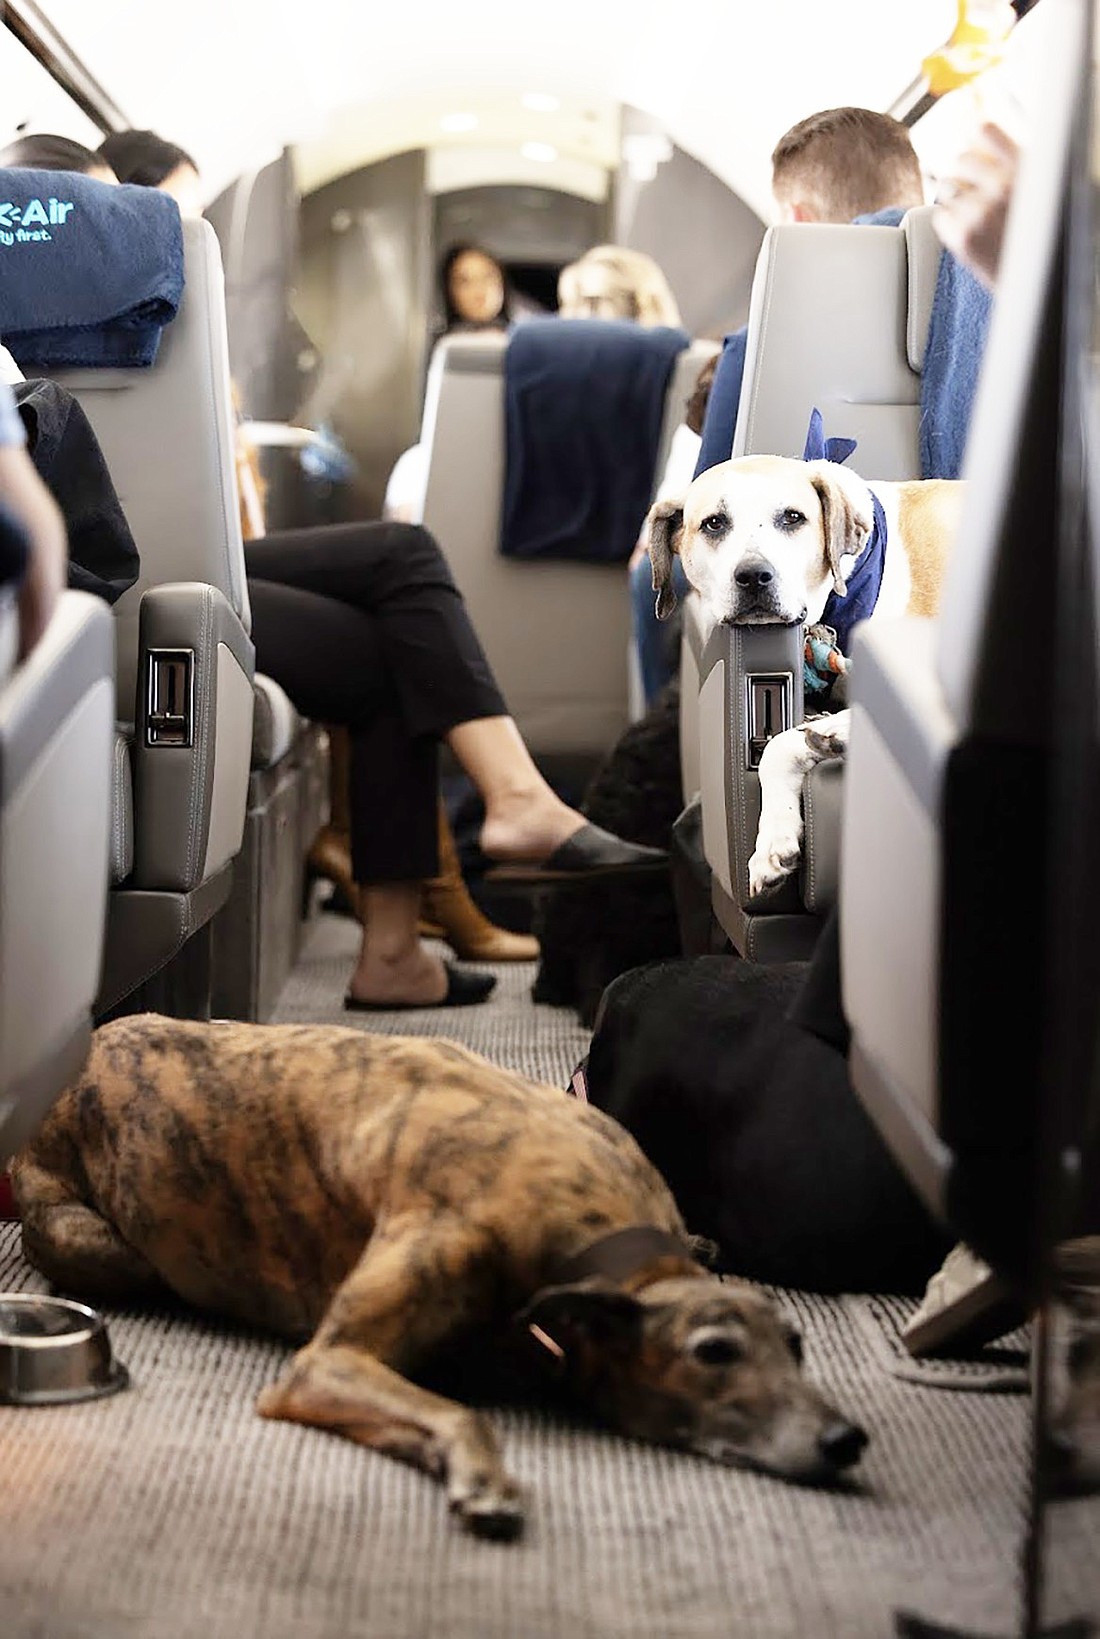 A BARK Air flight takes off with dogs and their owners.